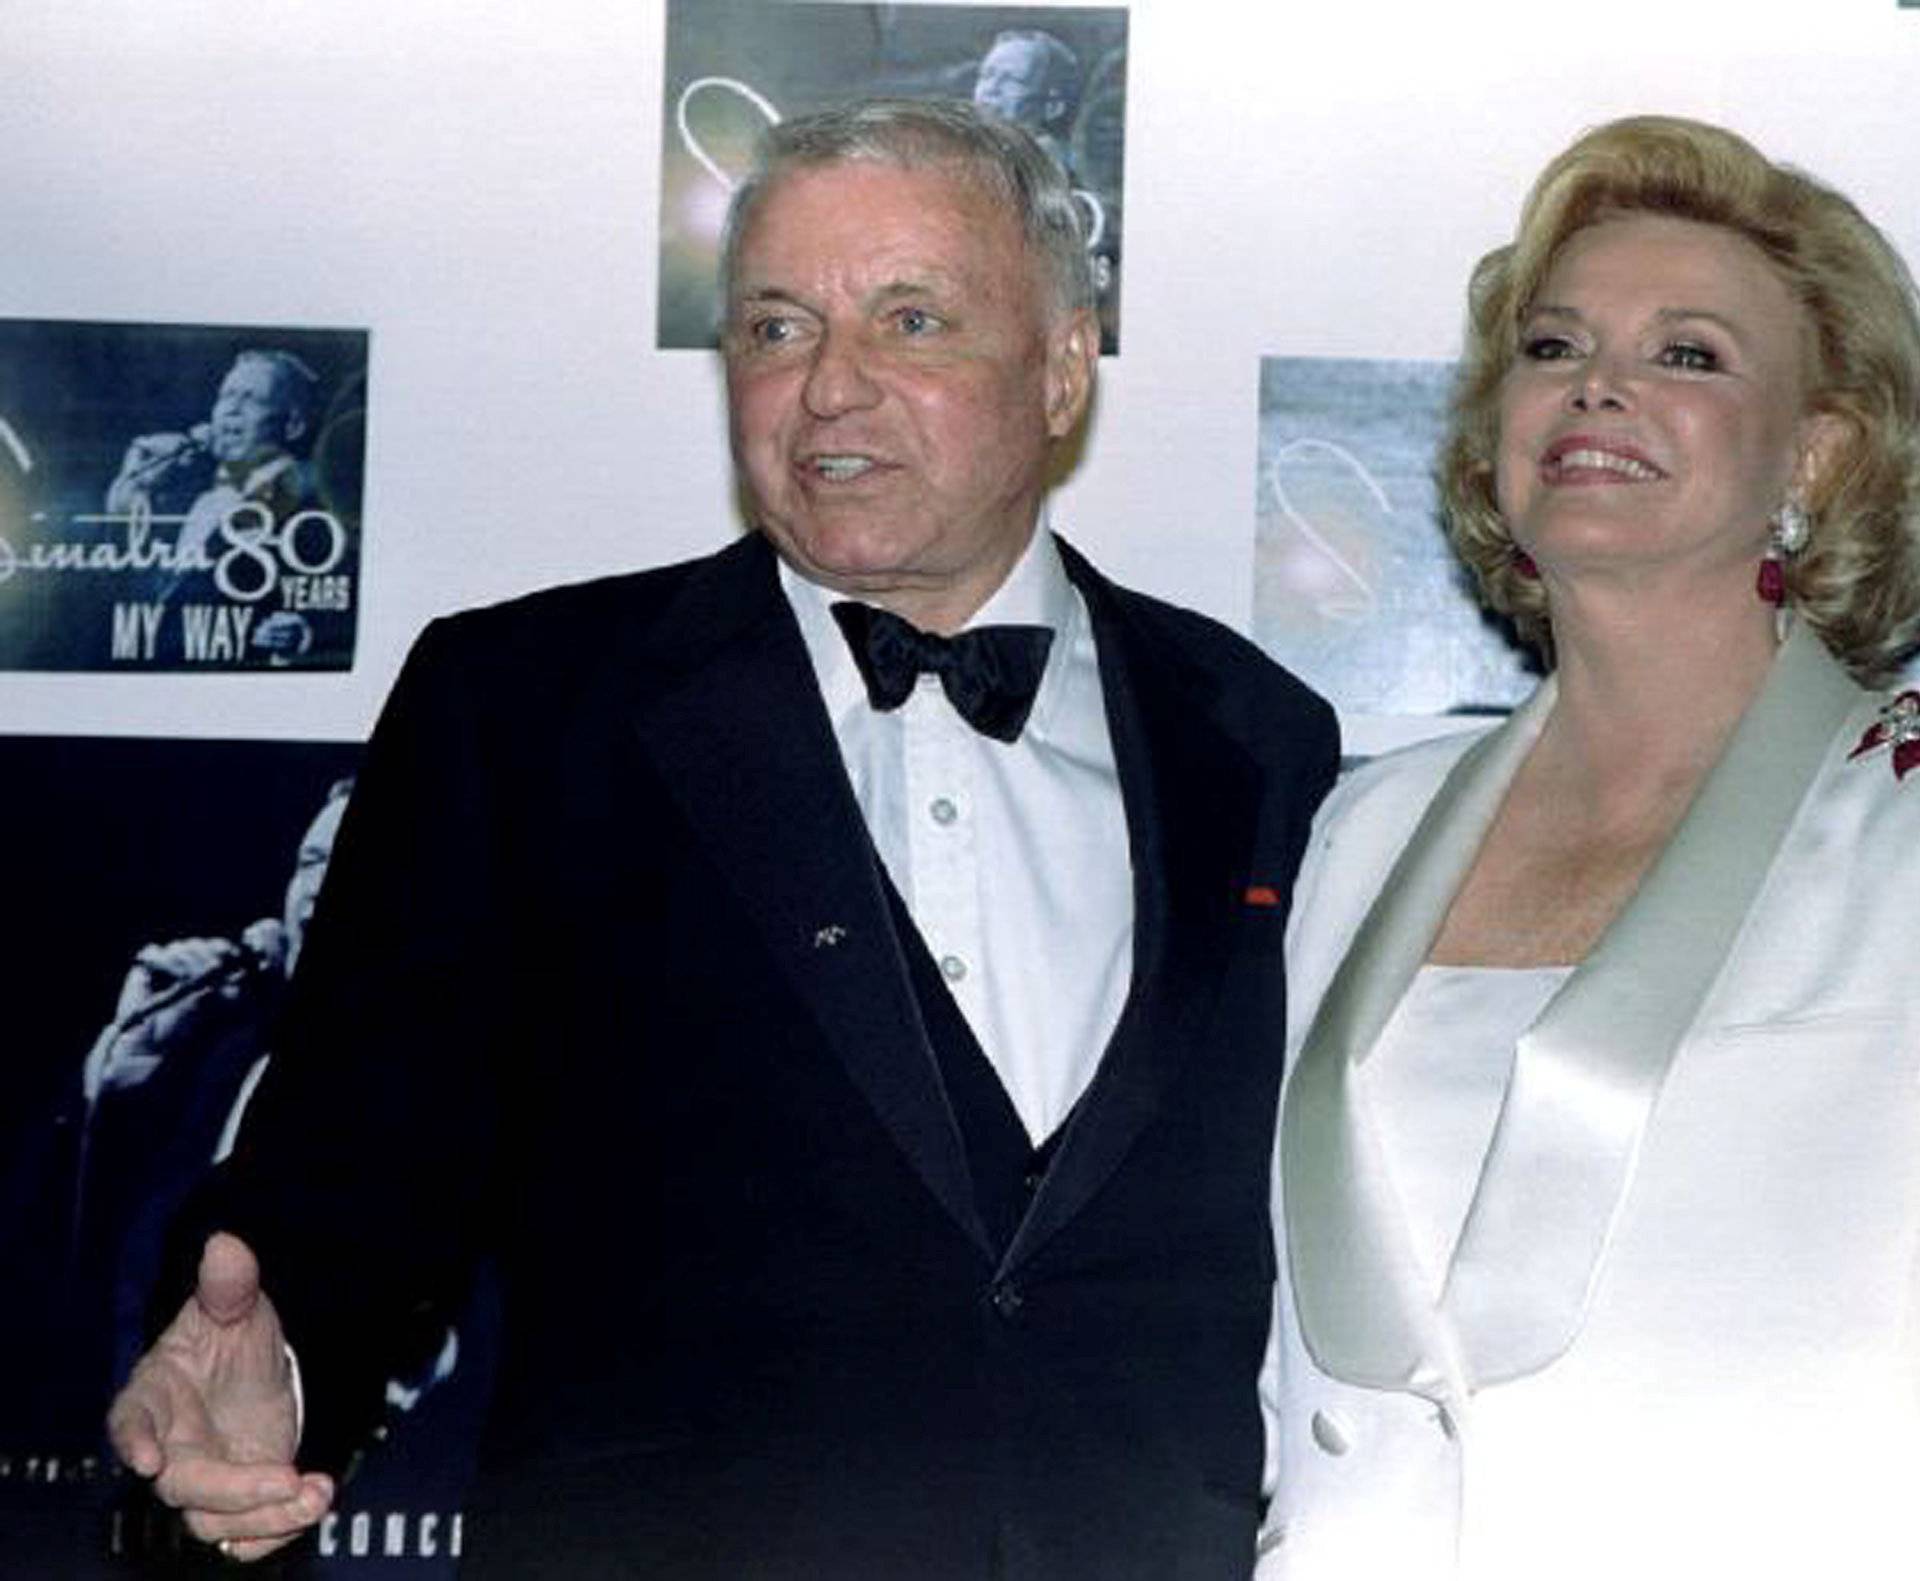 FILE PHOTO - Legendary entertainer Frank Sinatra and his wife Barbara at the Shrine Auditorium in Los Angeles